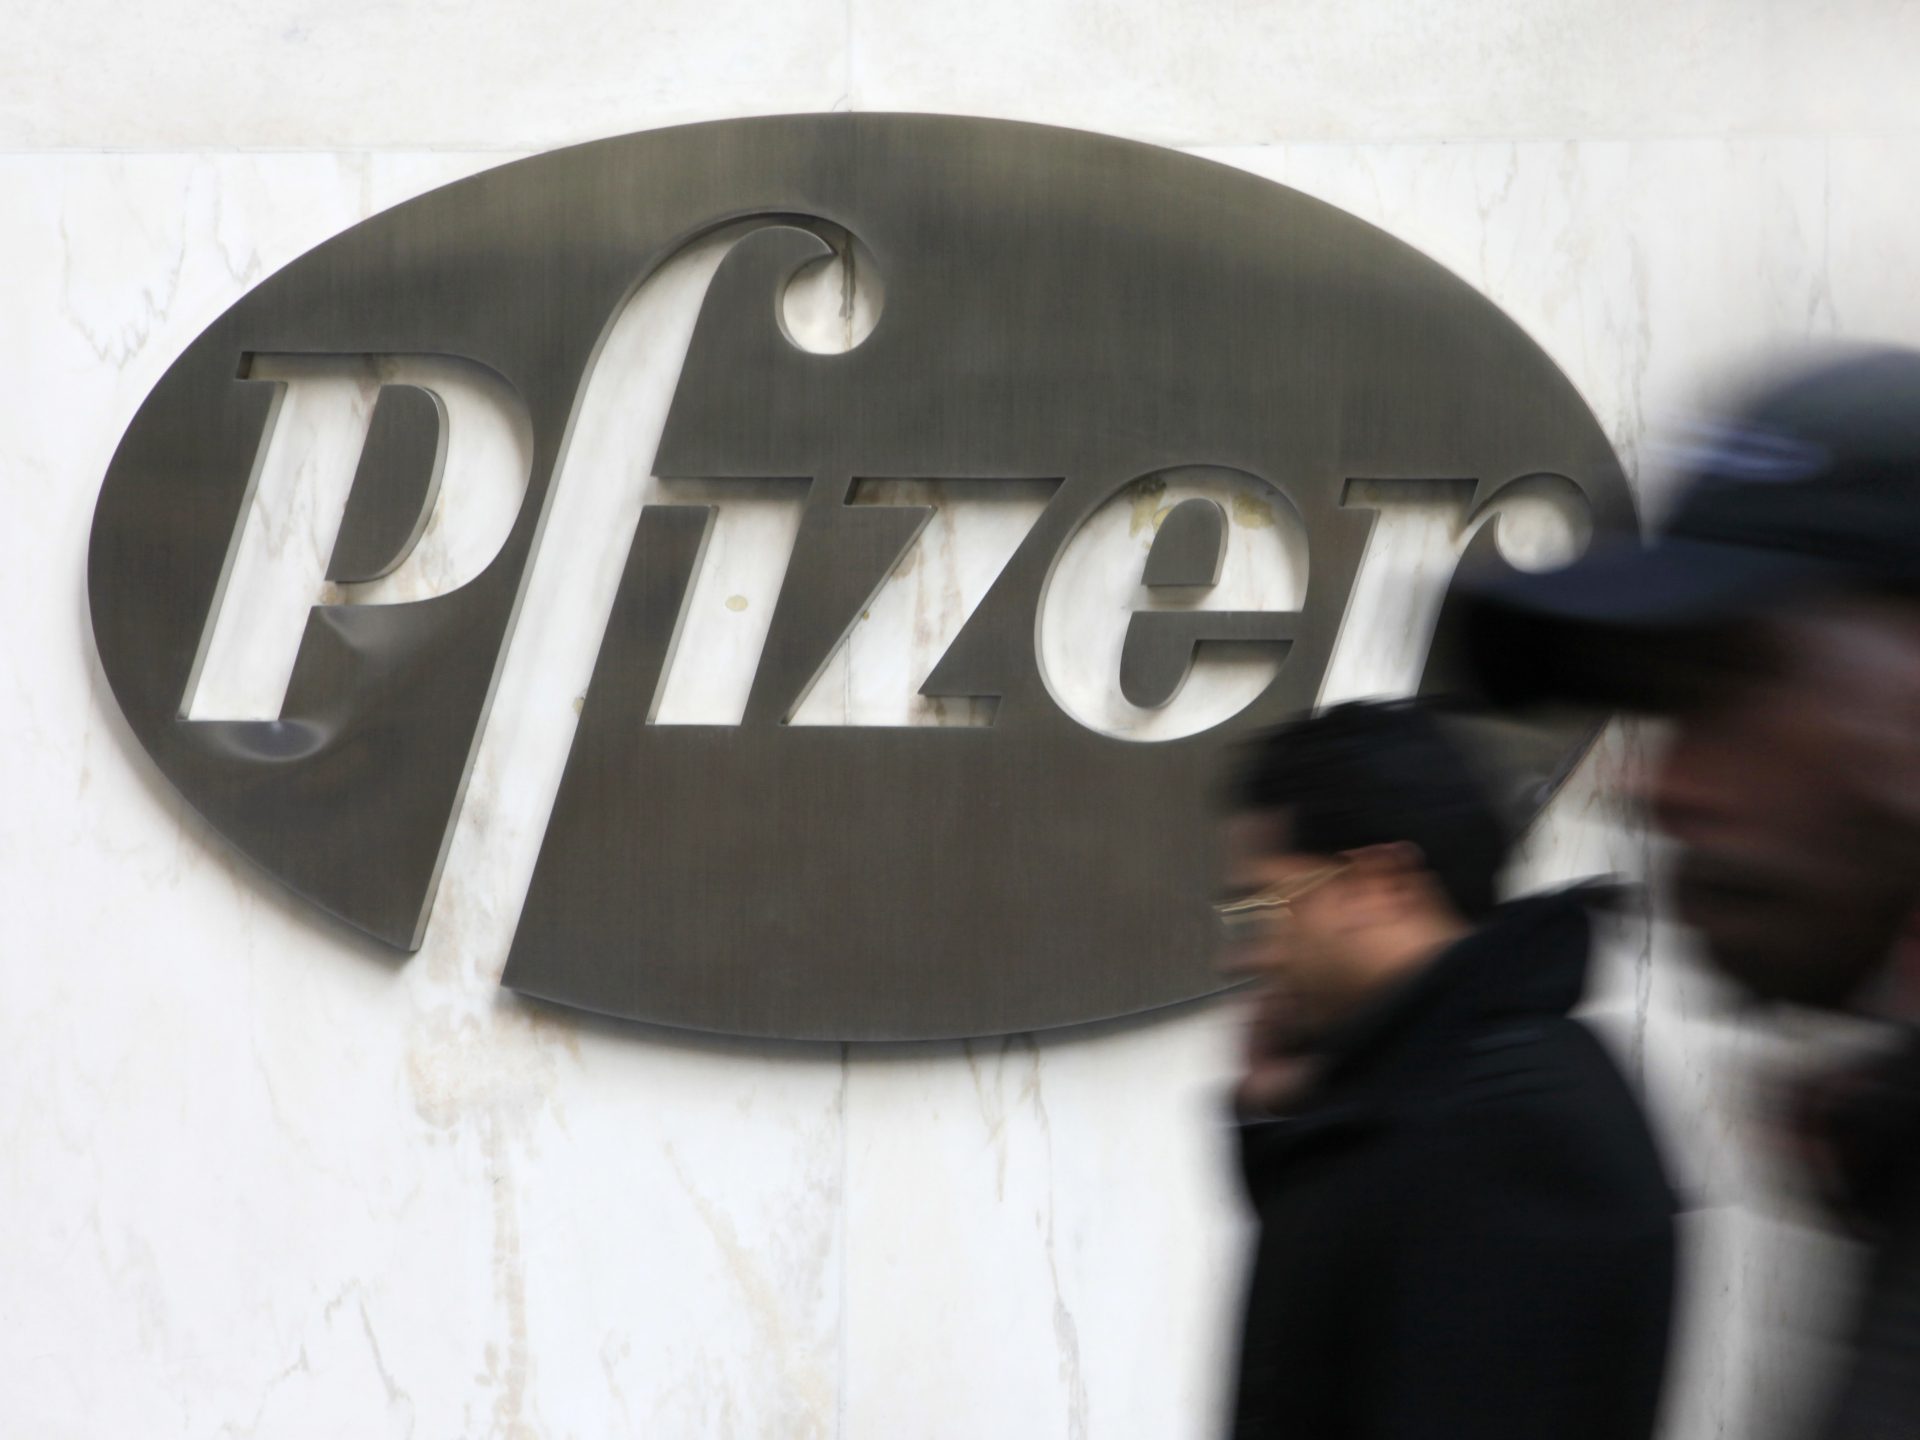 Pfizer said a clinical trial of its experimental COVID-19 vaccine found it to be more than 90% effective.